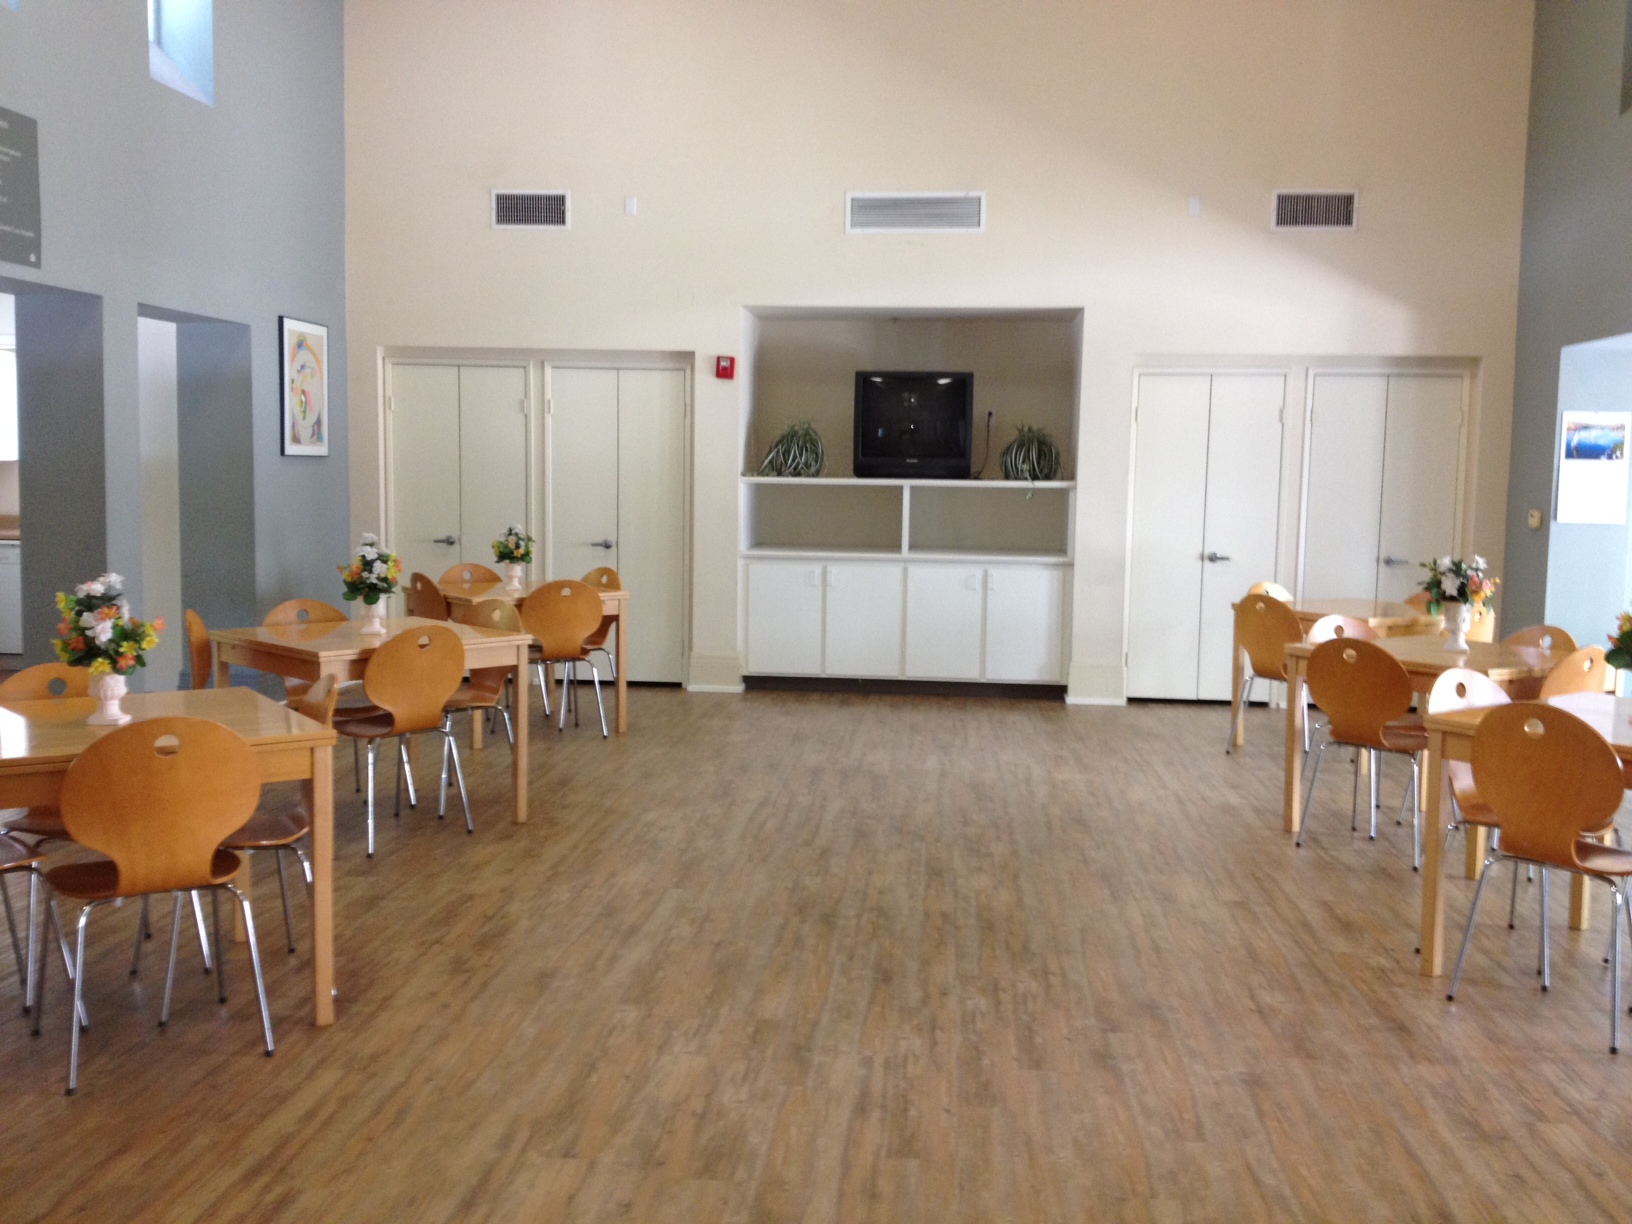 Interior view of the community room at Echo Park Senior Housing with square tables and chairs